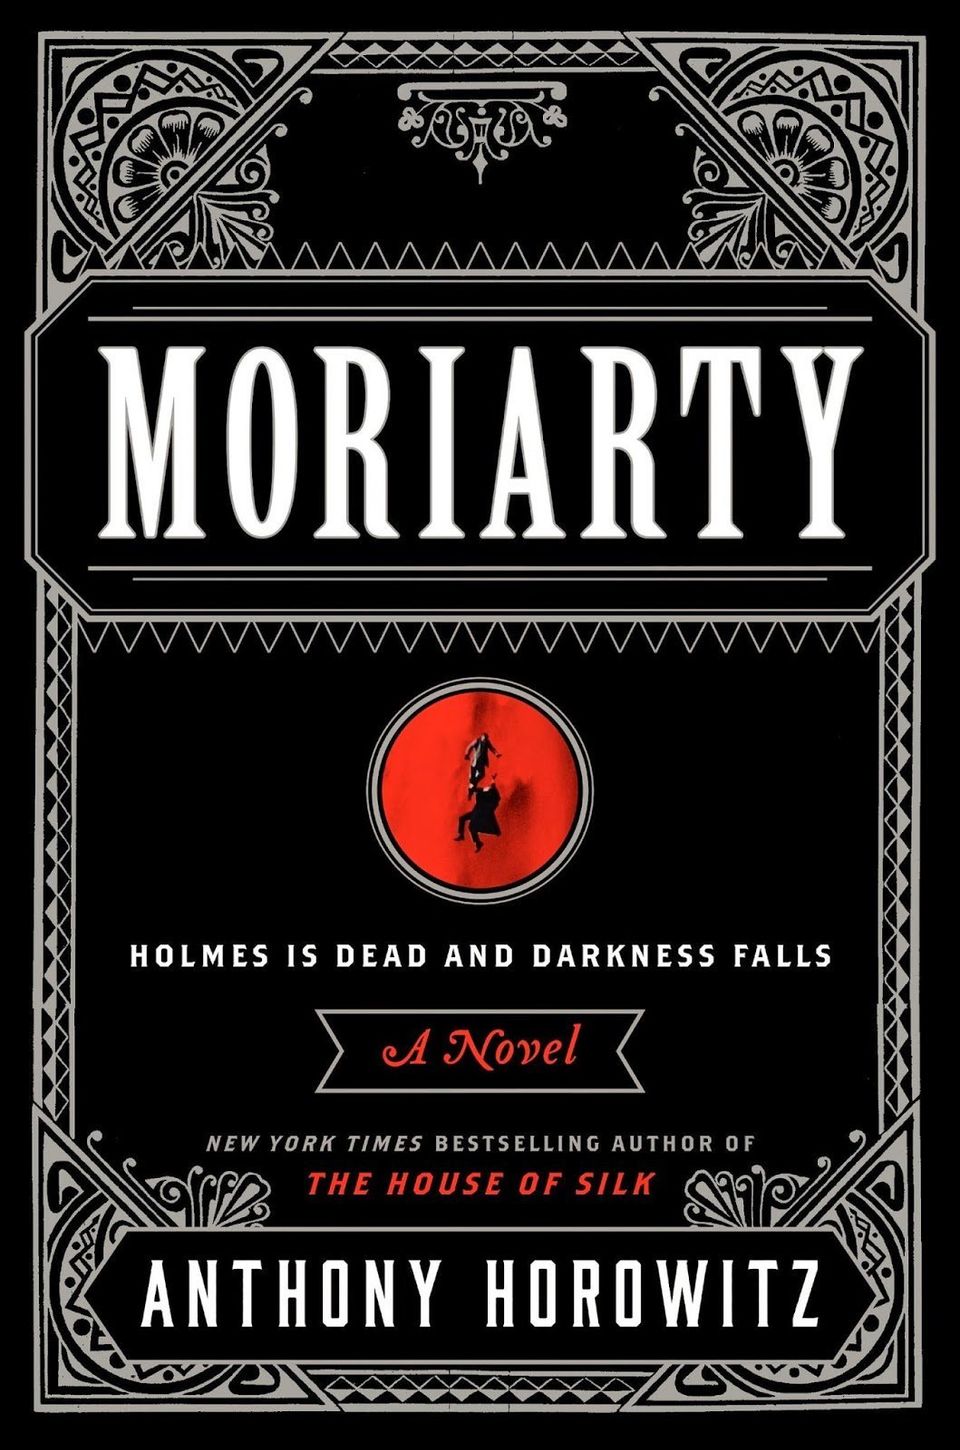 'Moriarty' by Anthony Horowitz